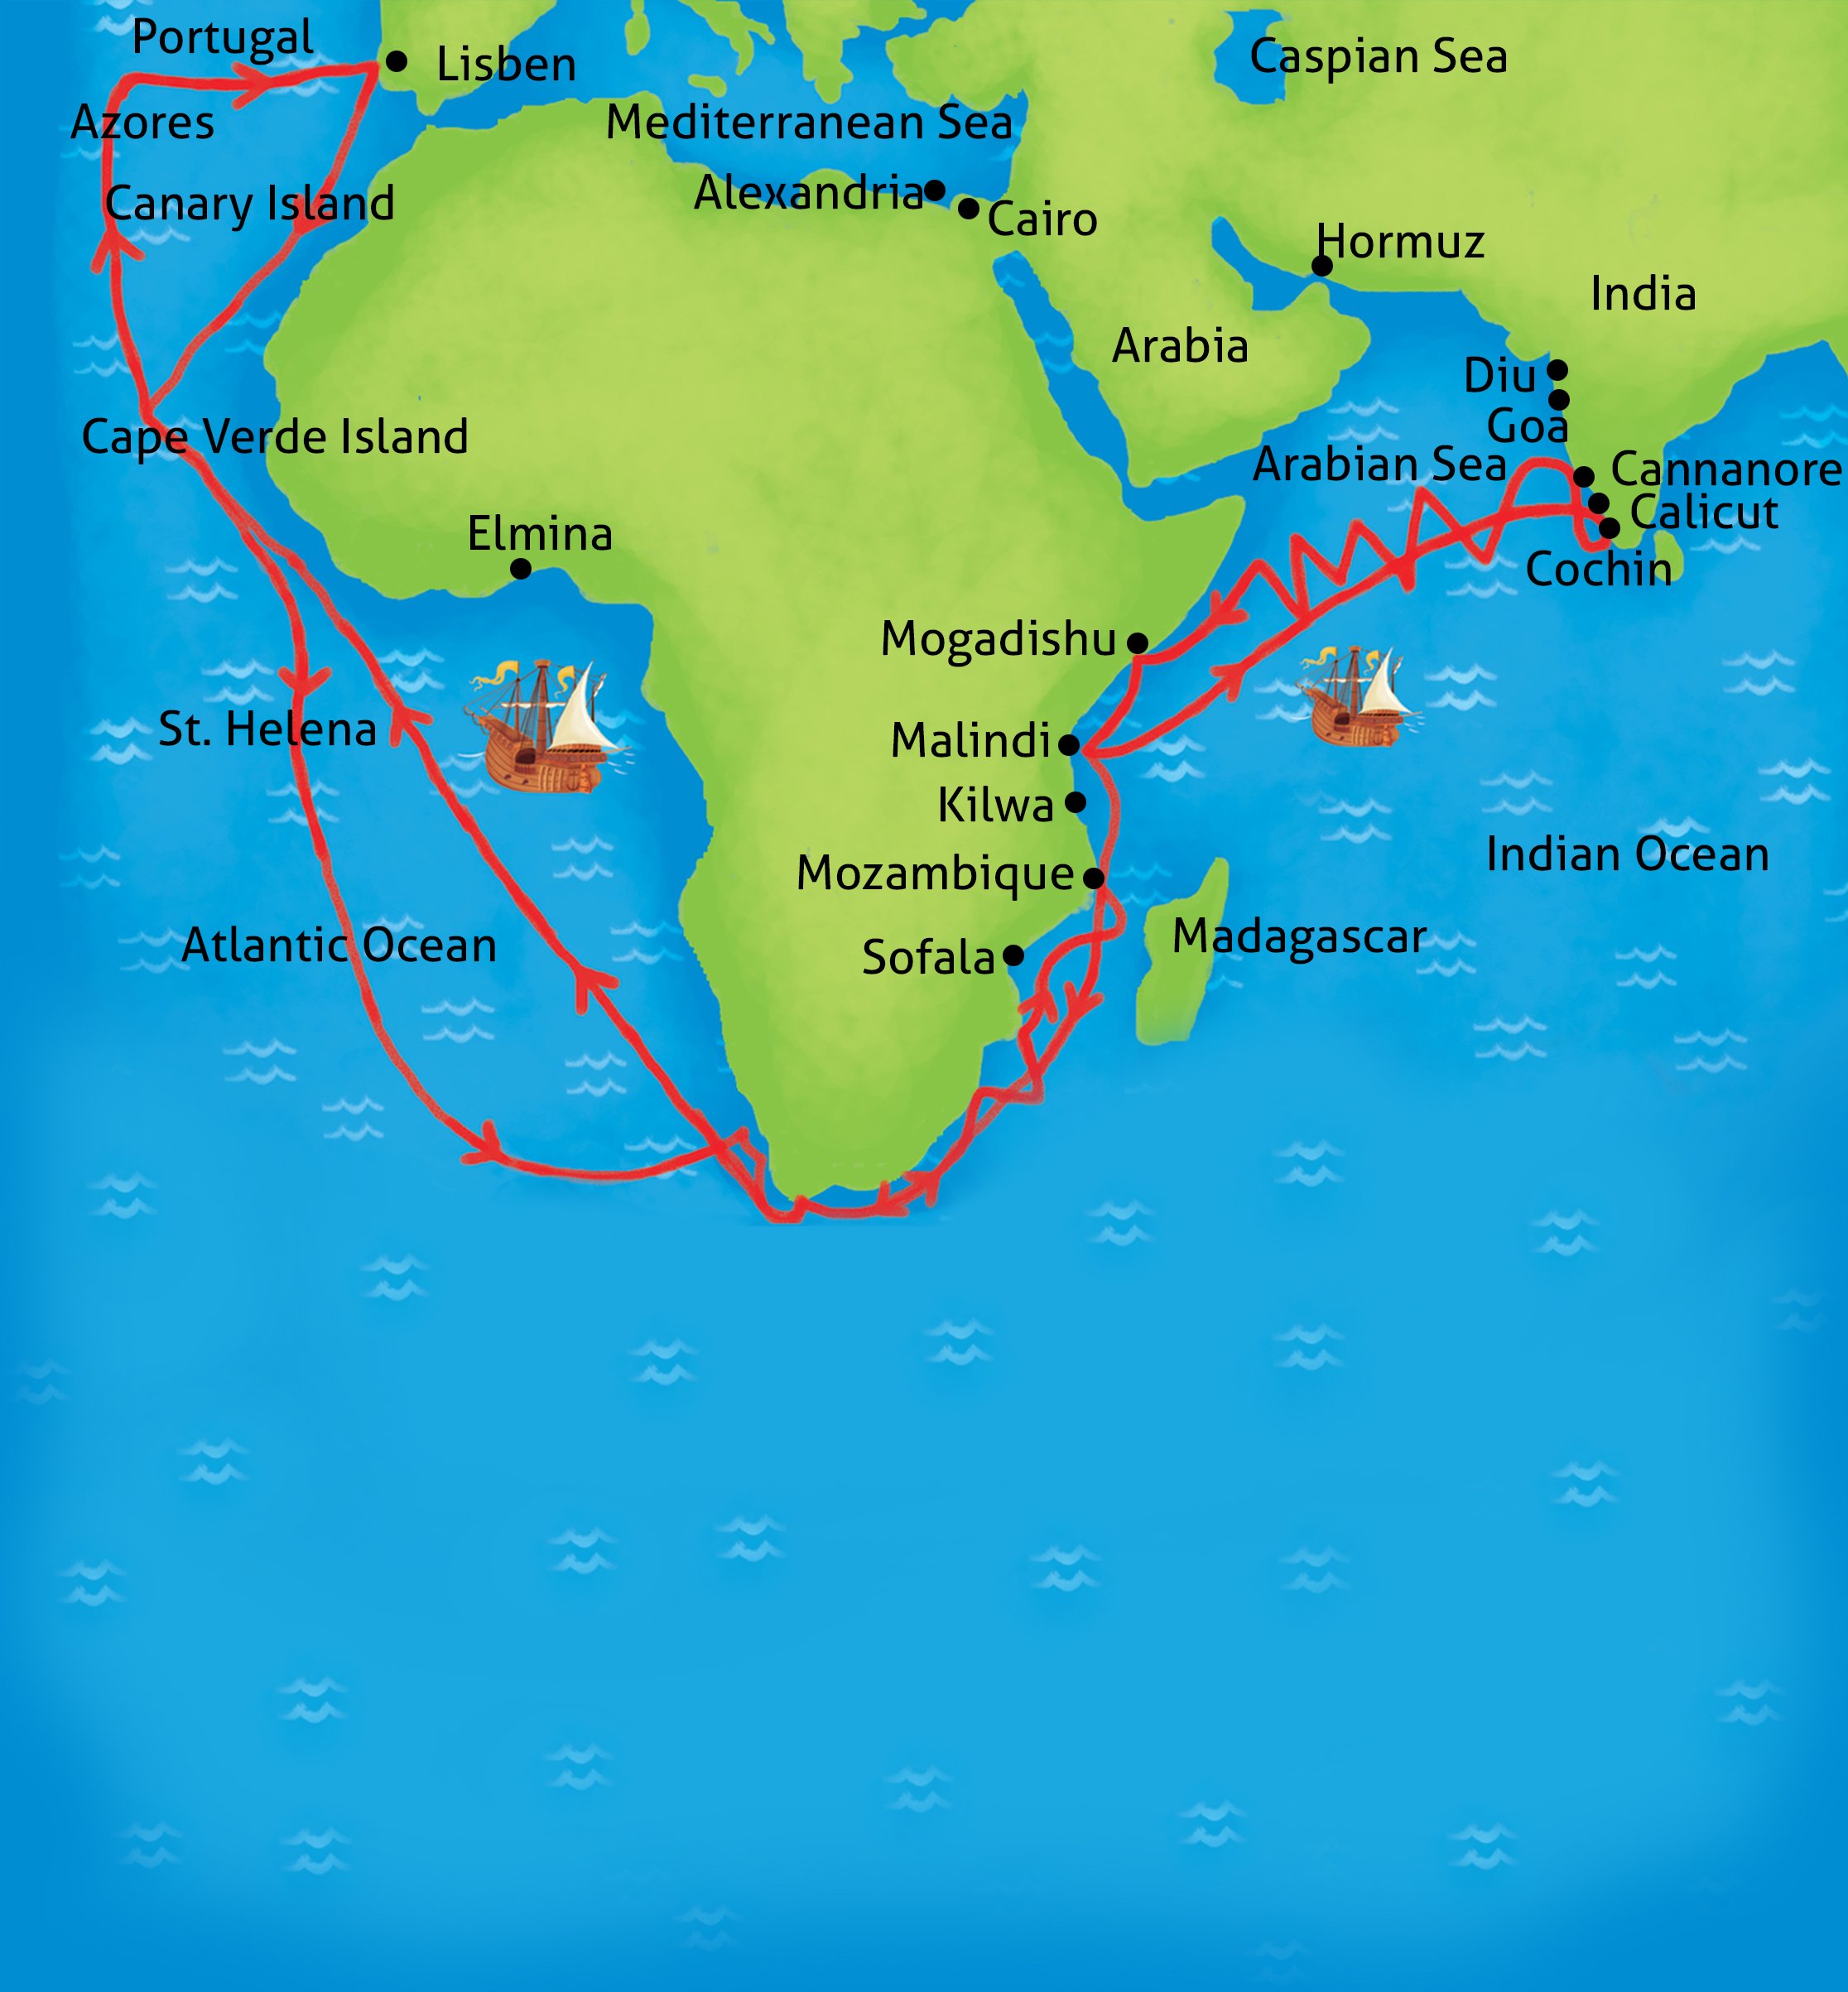 what did vasco da gama want to discover